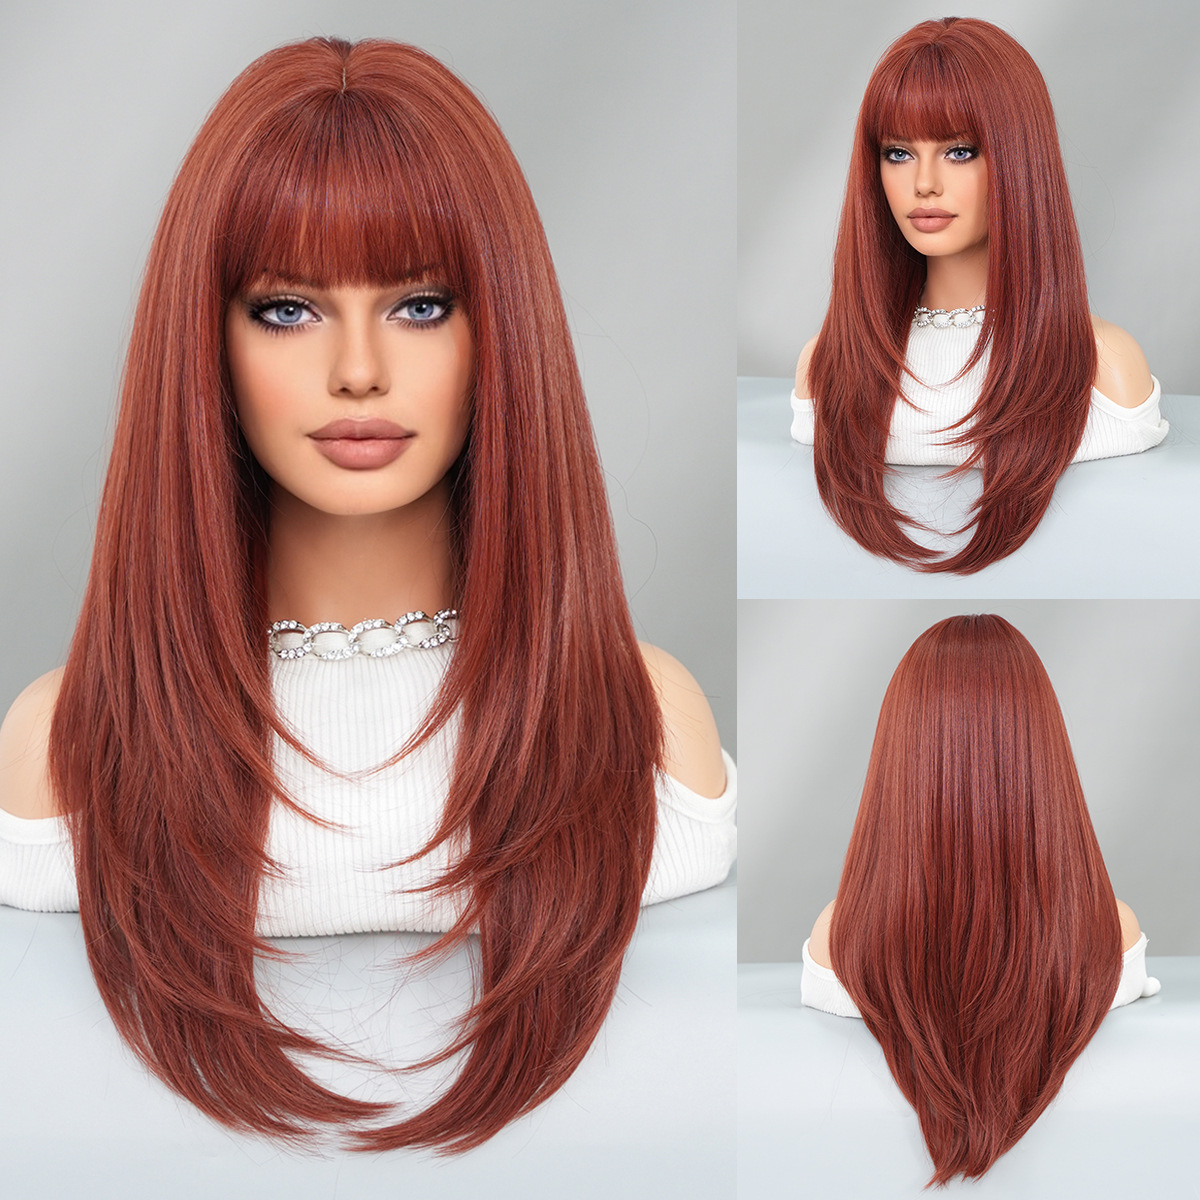 A synthetic wig designed for women, featuring multicolor long curly hair and stylish puffy air bangs